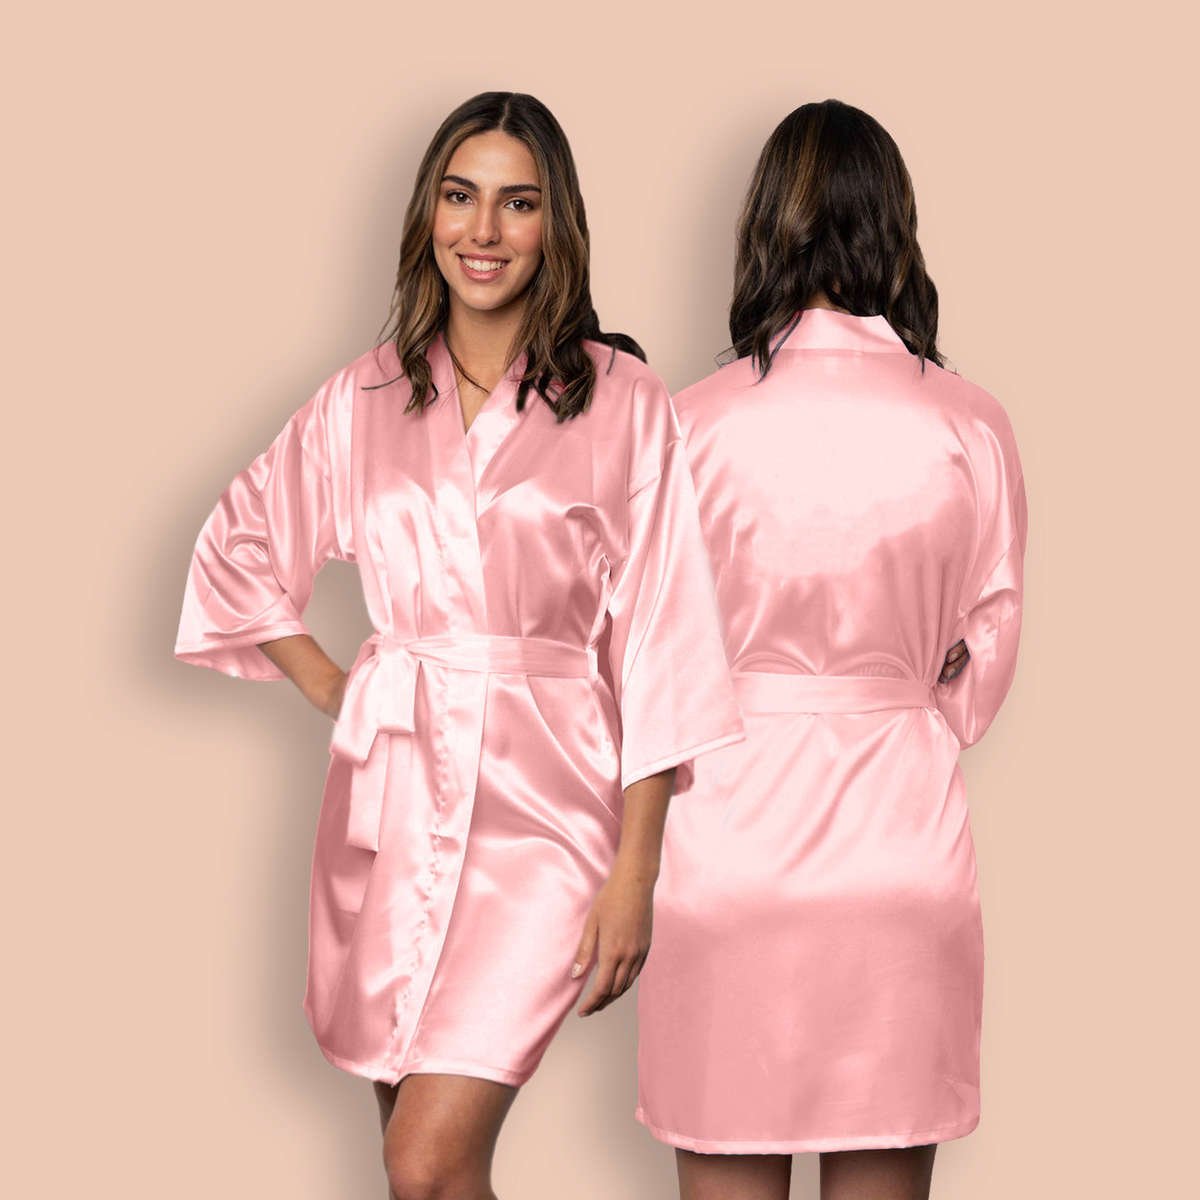 Satin rose pink womens robe that can be customized with text and symbols in the front and back of the robe.